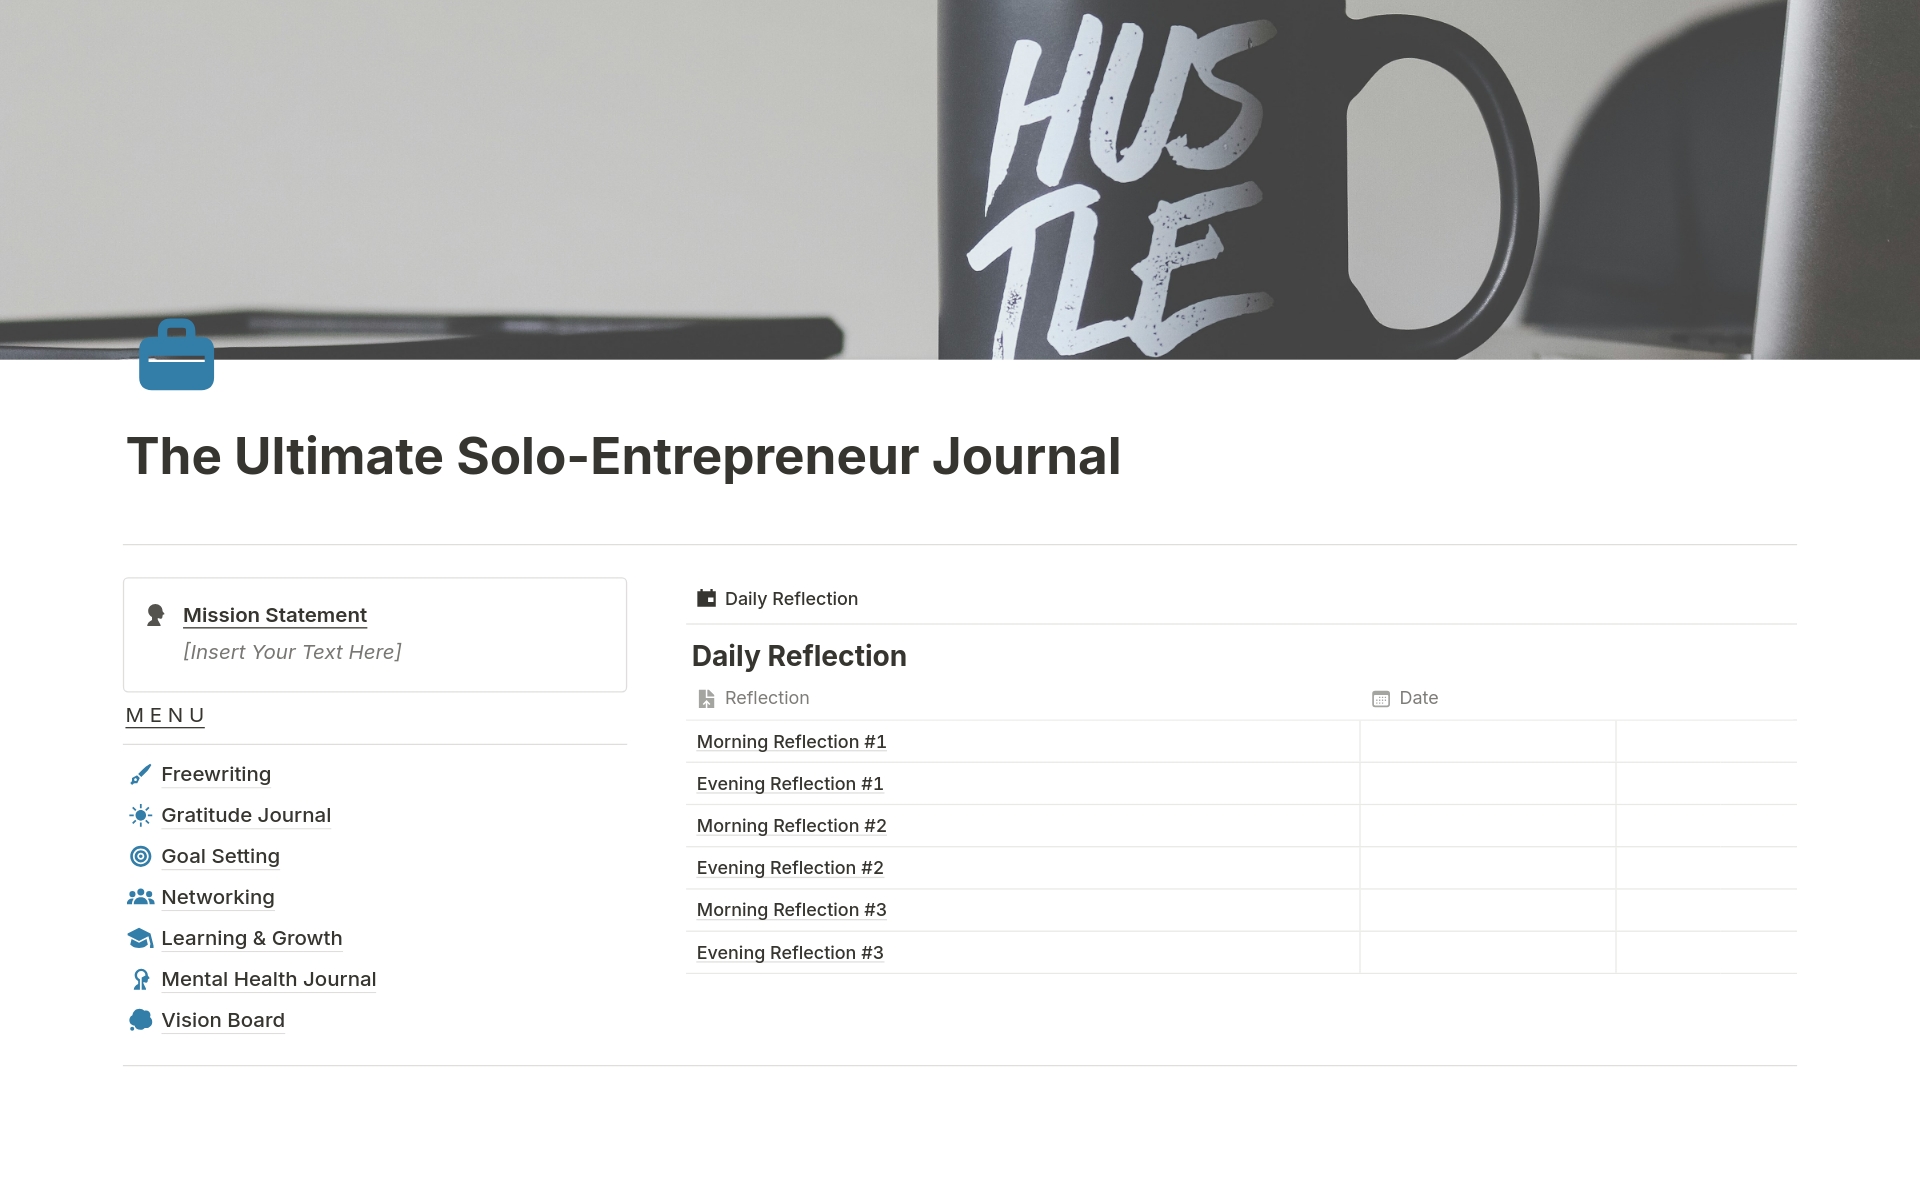 Enhance your productivity with The Ultimate Solo-entrepreneur Journal in Notion. Track daily reflections, goals, gratitude, learning, mental health, and more. Stay organized and achieve your dreams effortlessly.